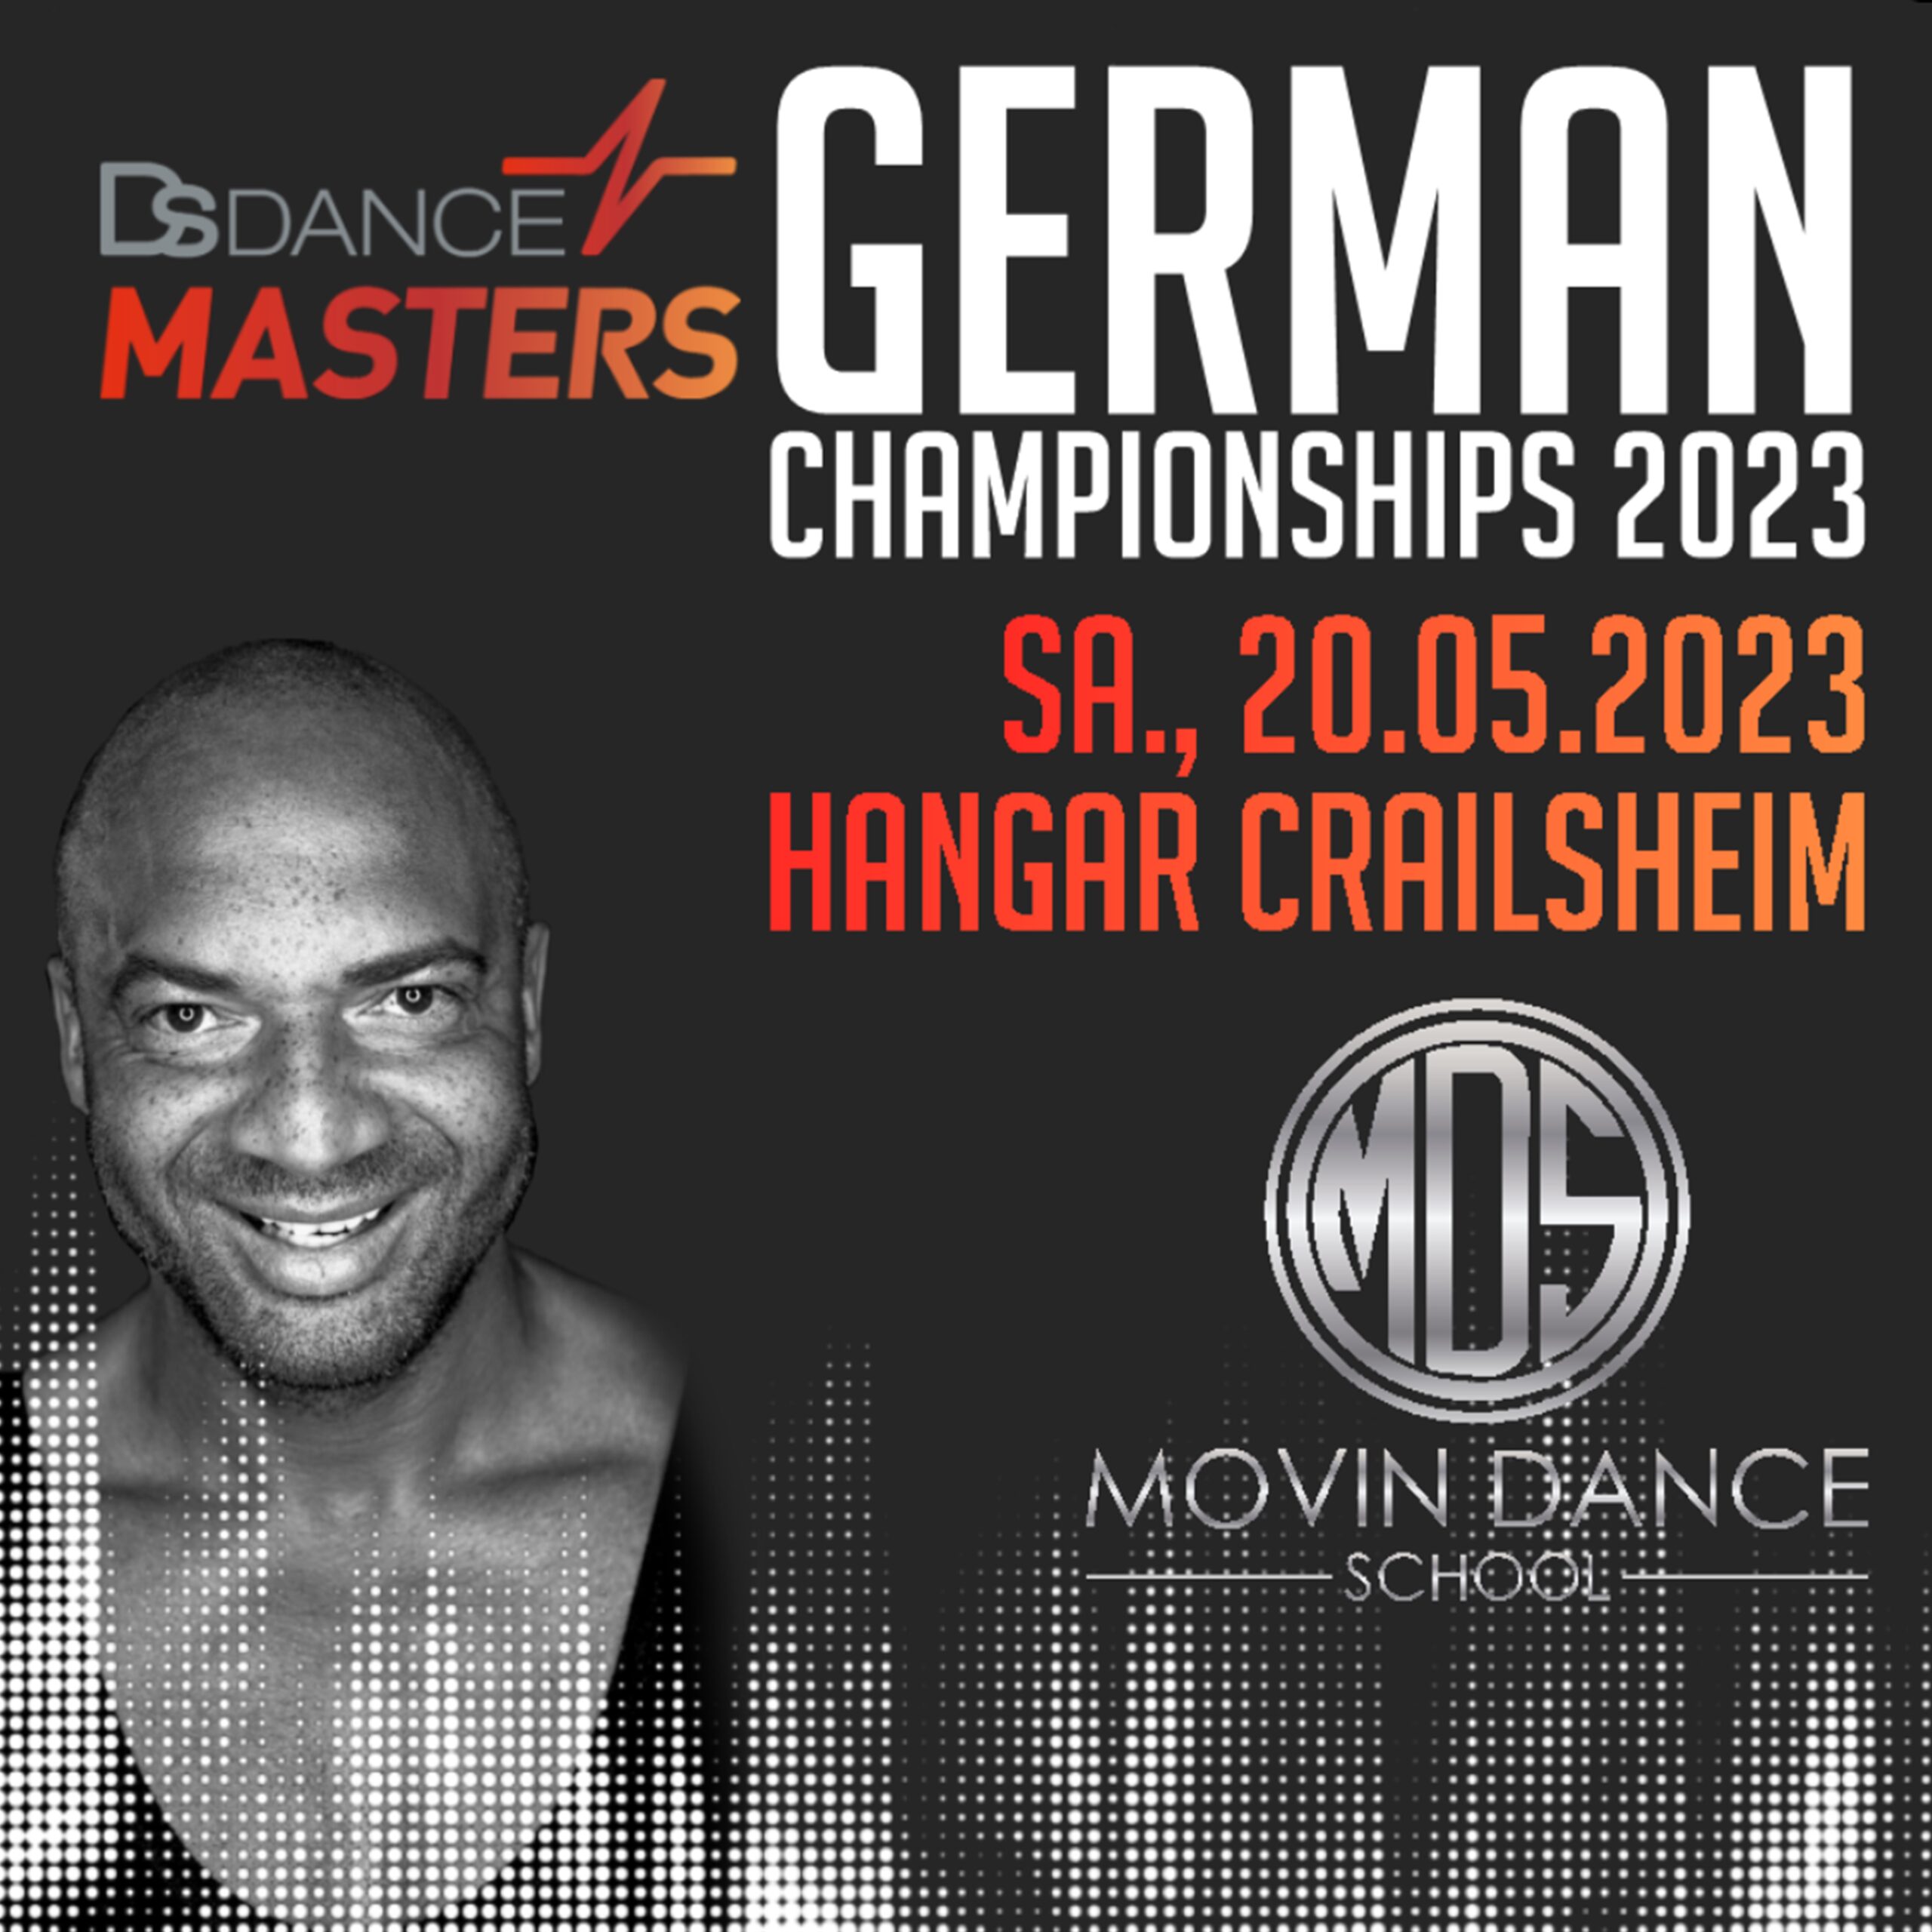 Ds Dance Masters – GERMAN CHAMPIONSHIPS 2023